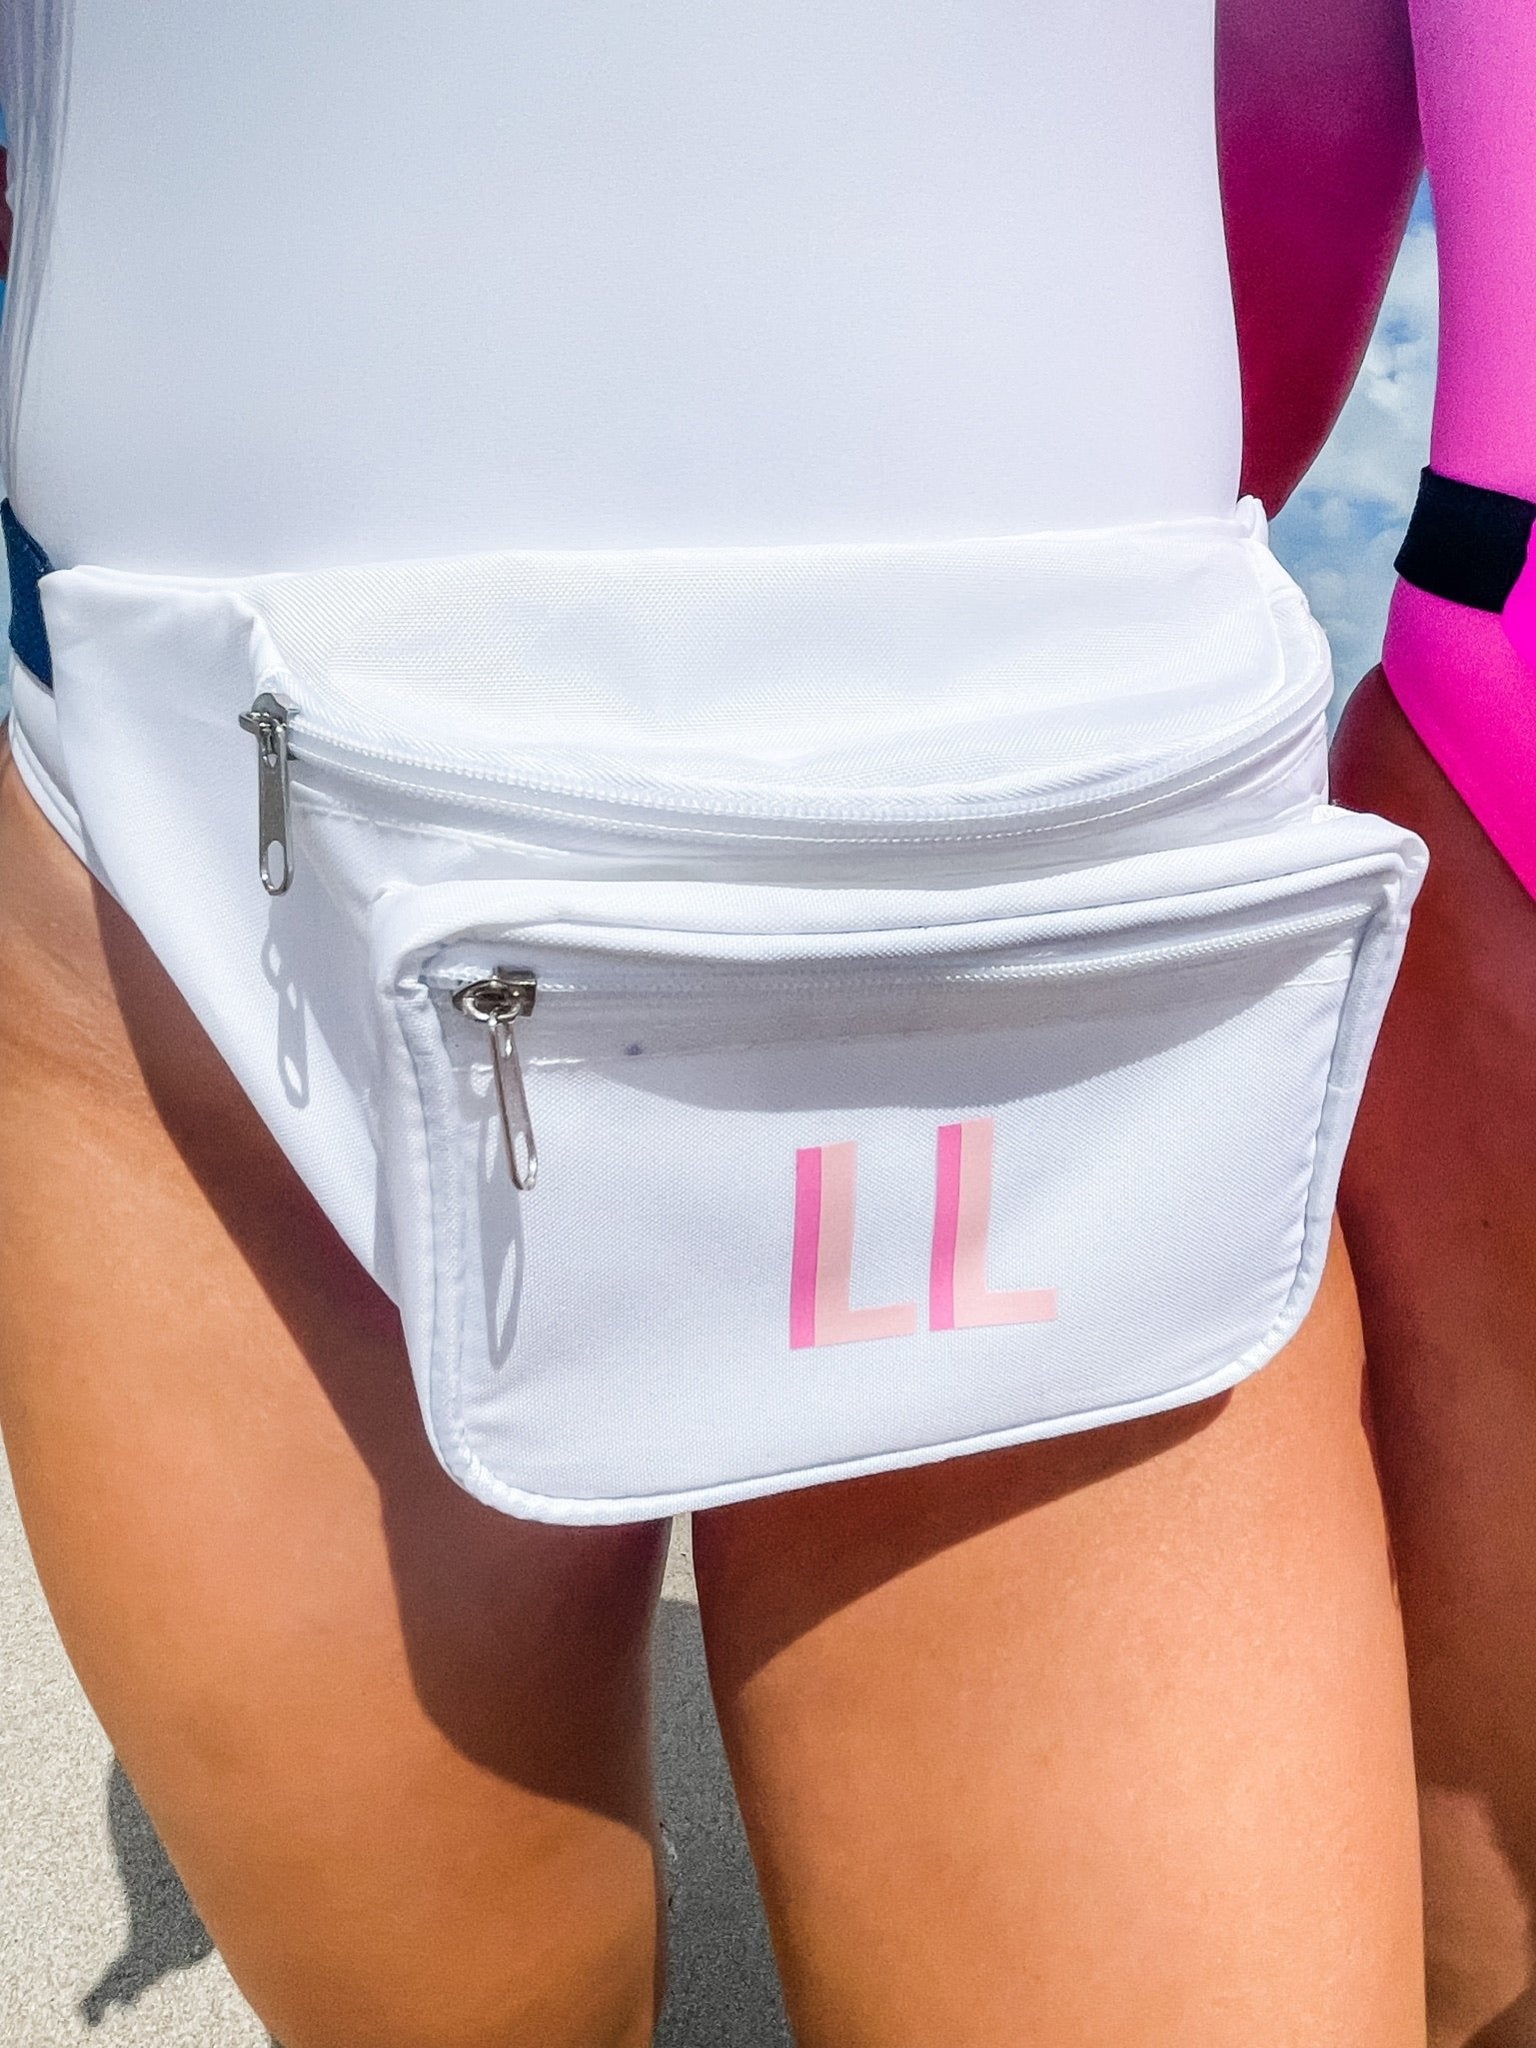 A group of fanny packs are customized with monograms